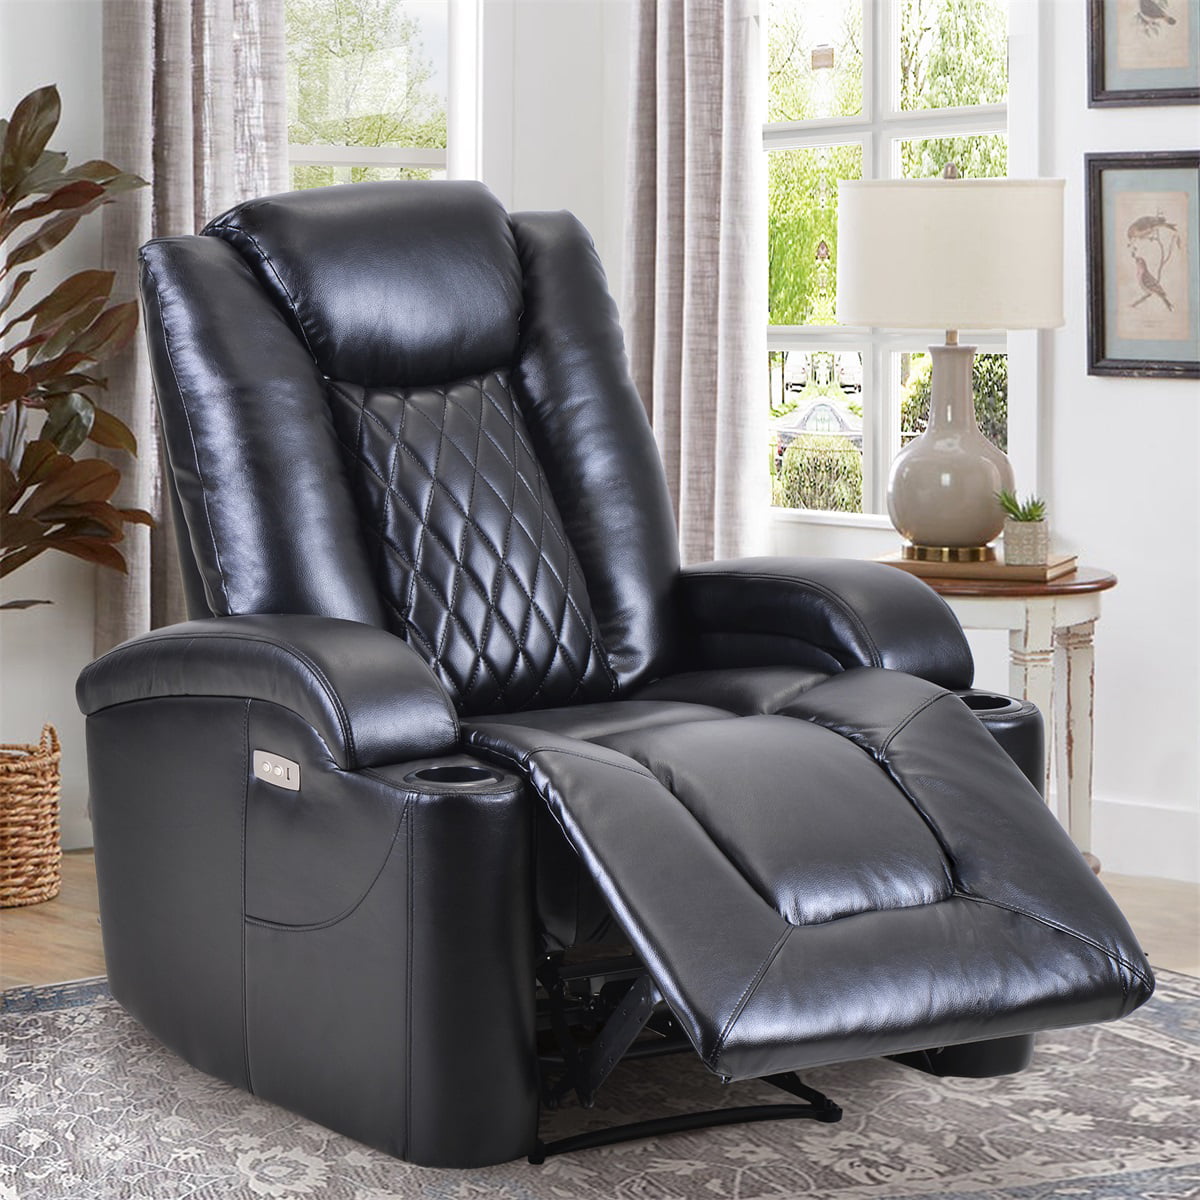 Topcobe Massage Power Lift Chair, Electric Recliner Chair with USB